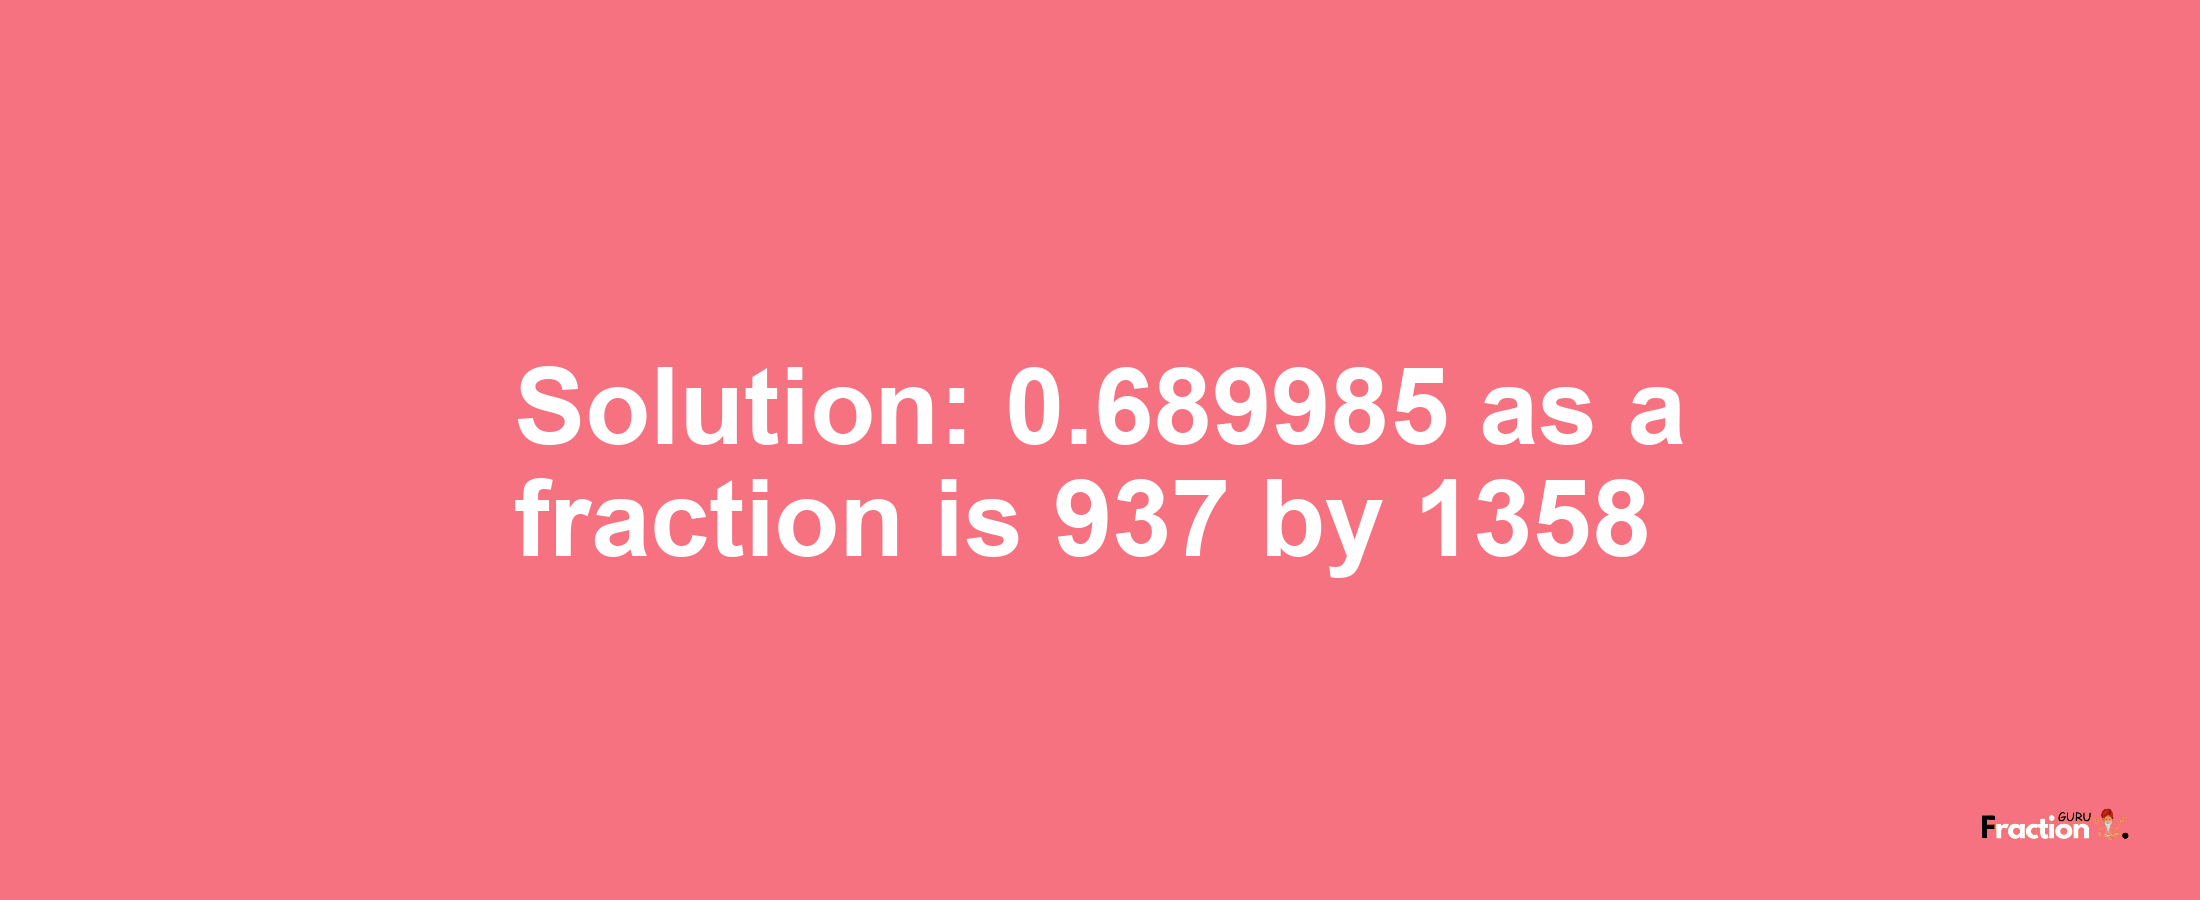 Solution:0.689985 as a fraction is 937/1358